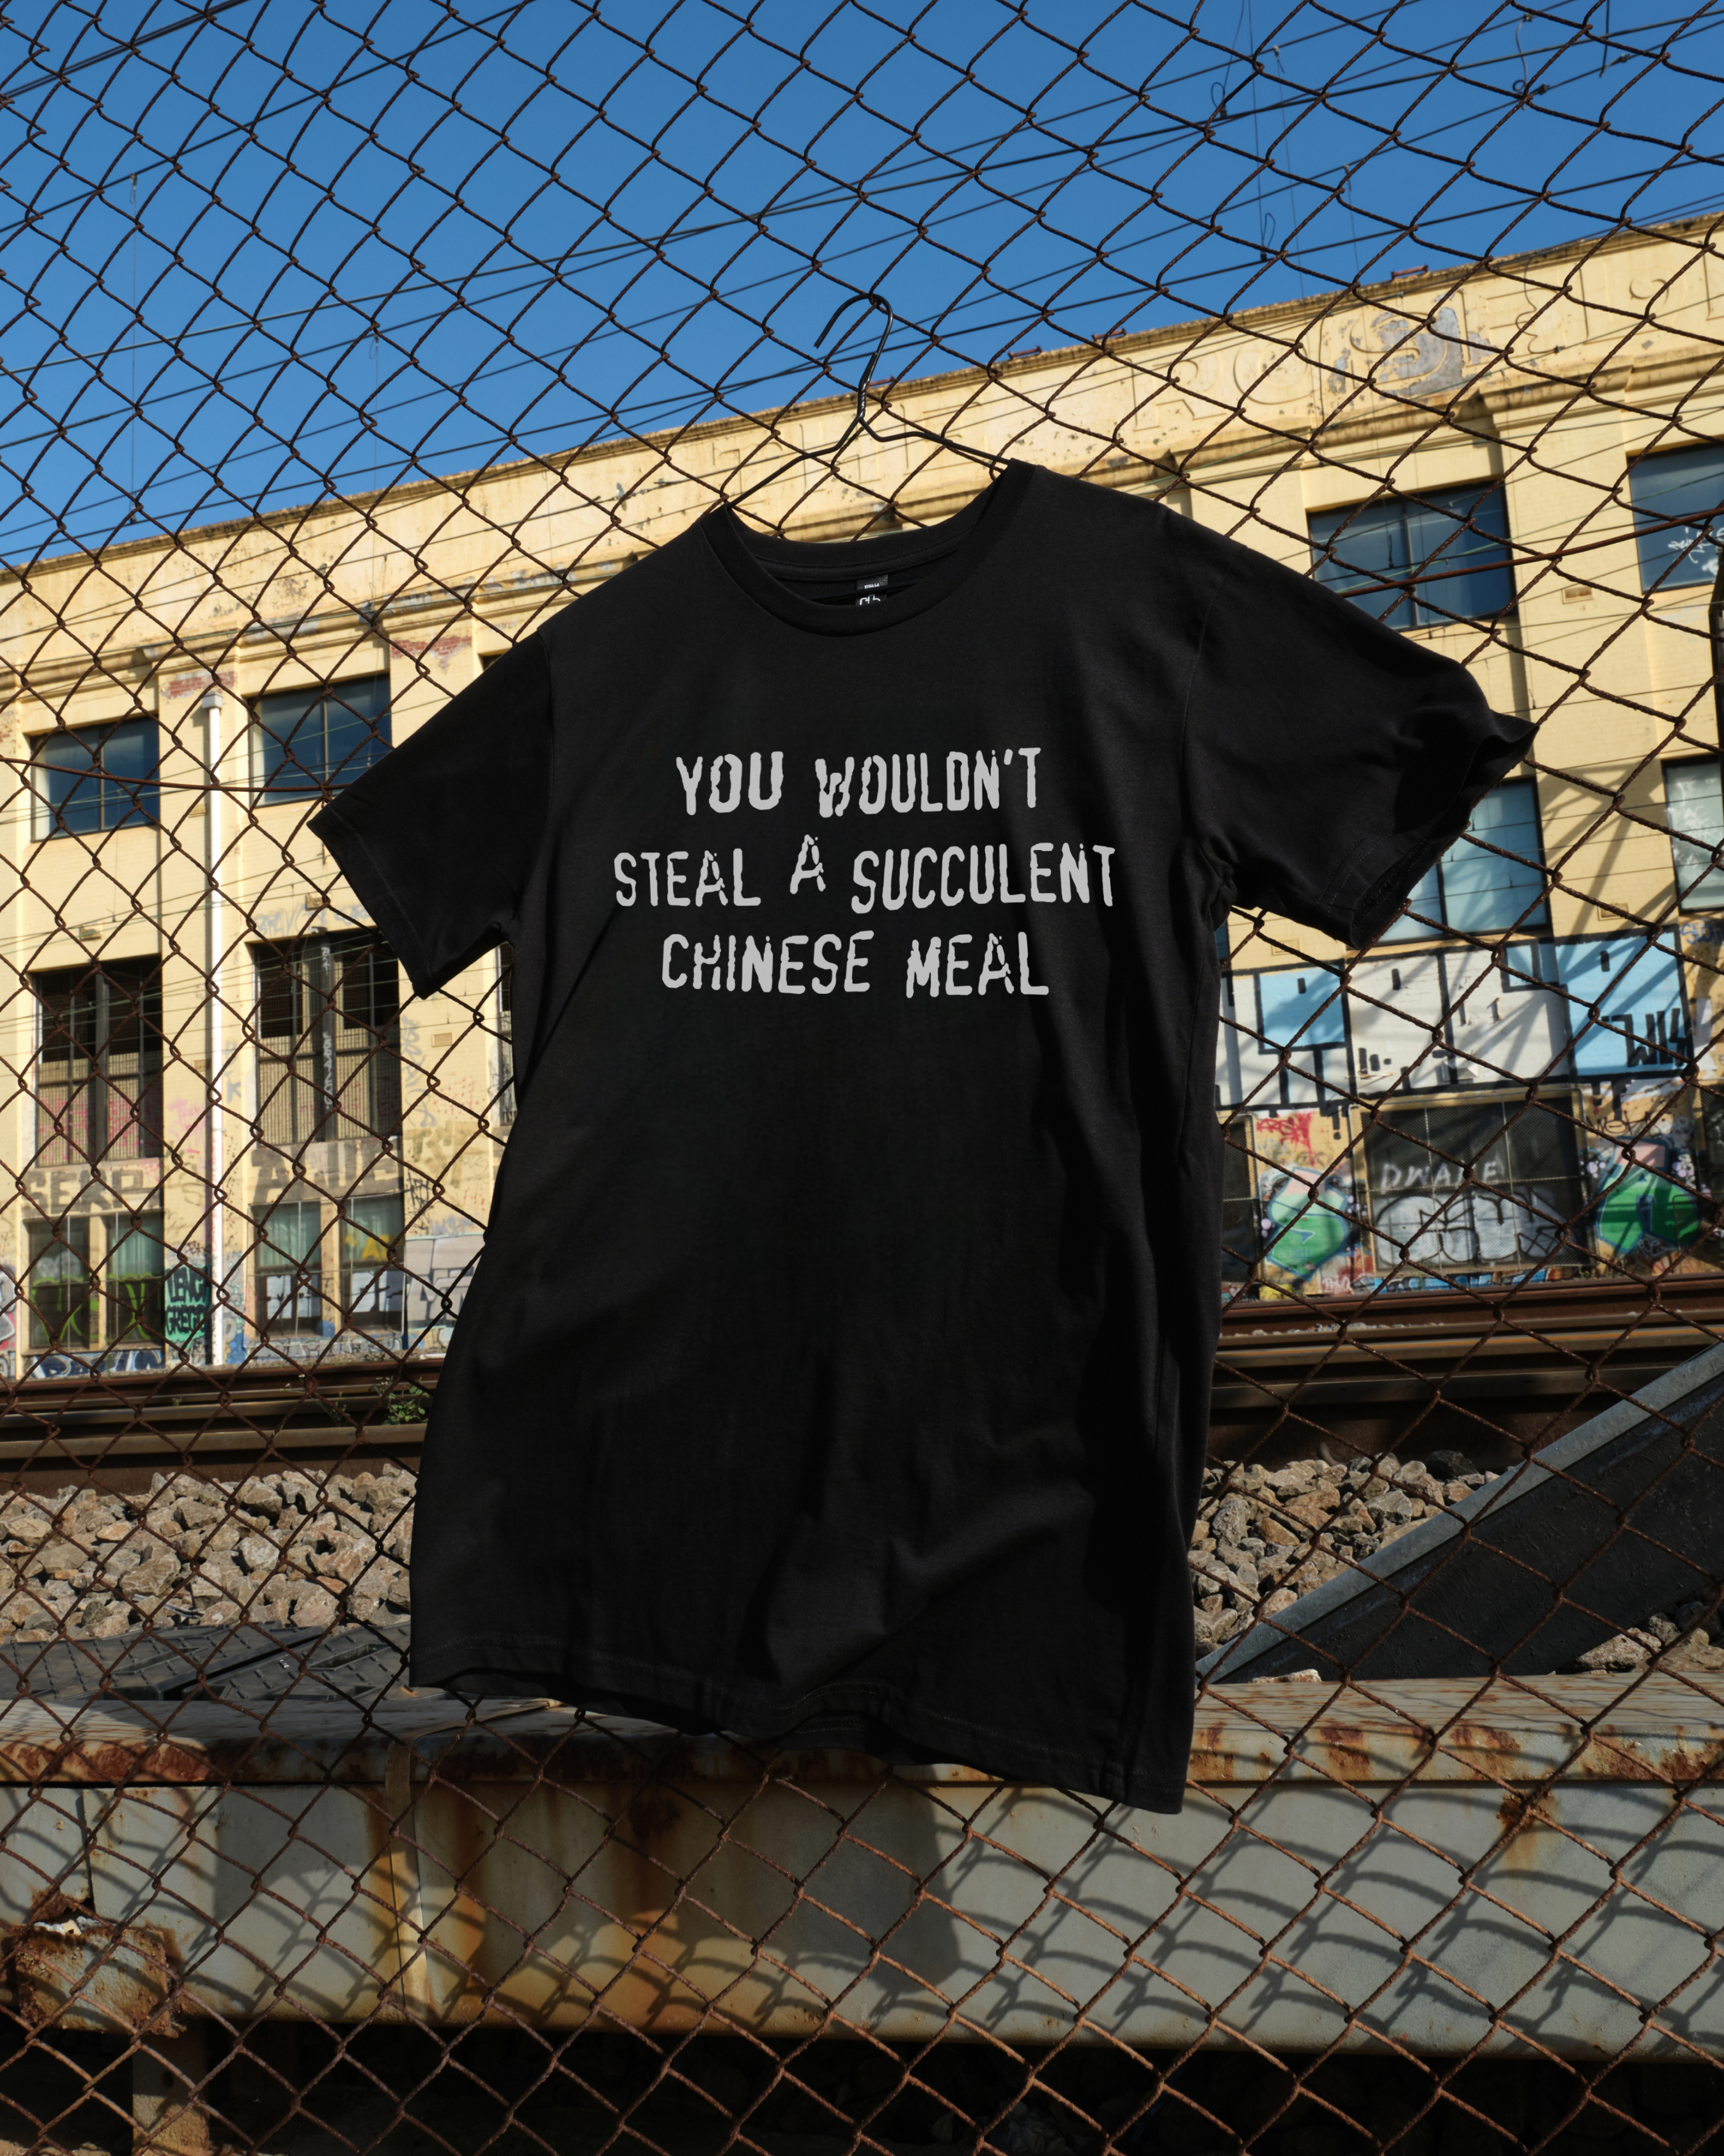 You Wouldn't Steal a Succulent Chinese Meal T-Shirt